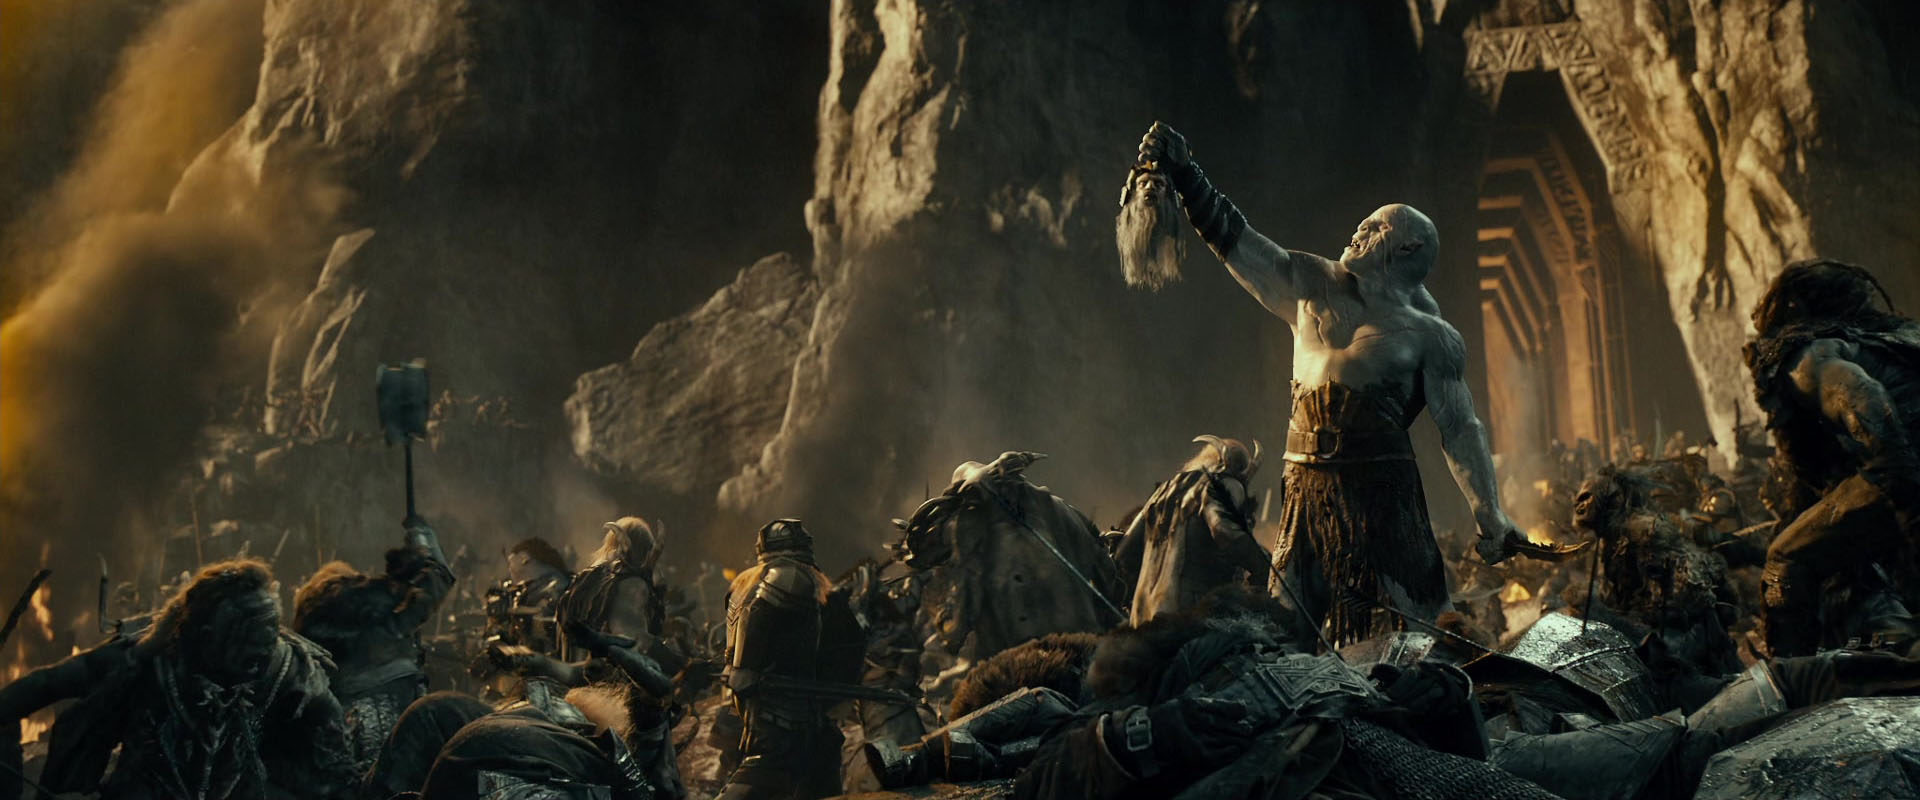 Moria, or Khazad-dûm, was founded by Durin the Deathless.